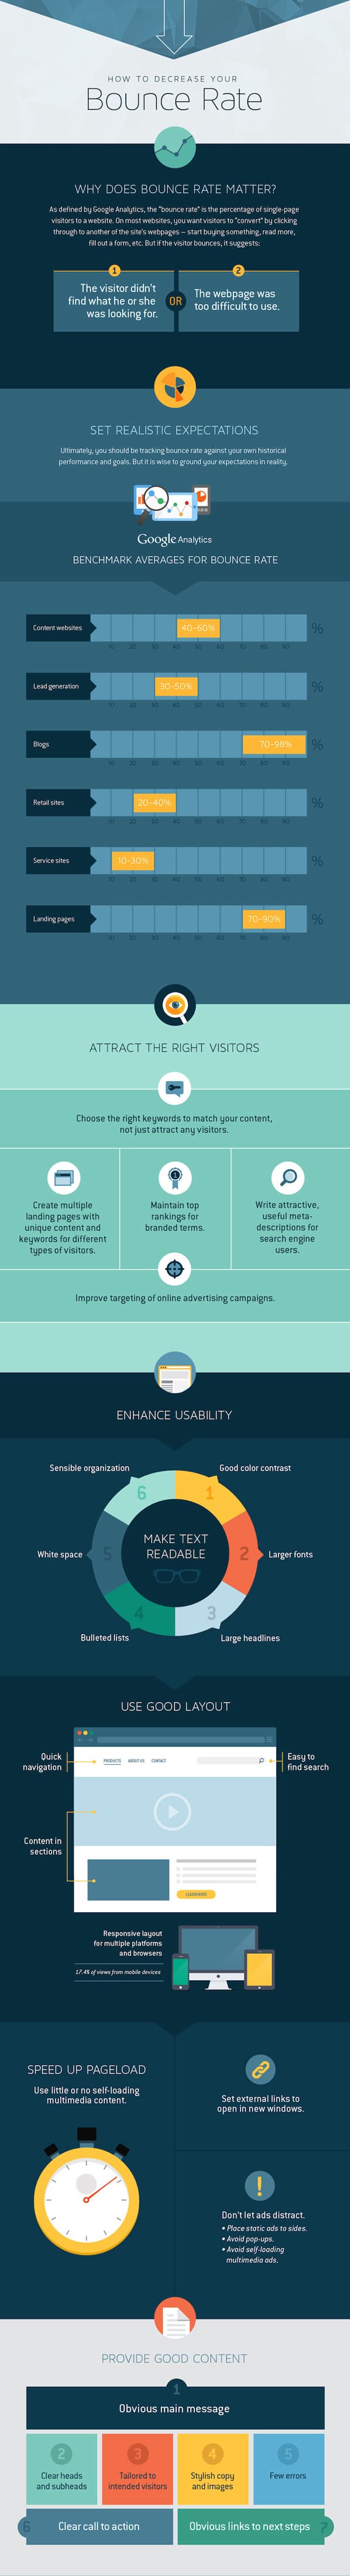 Improving Your Bounce Rate Infographic